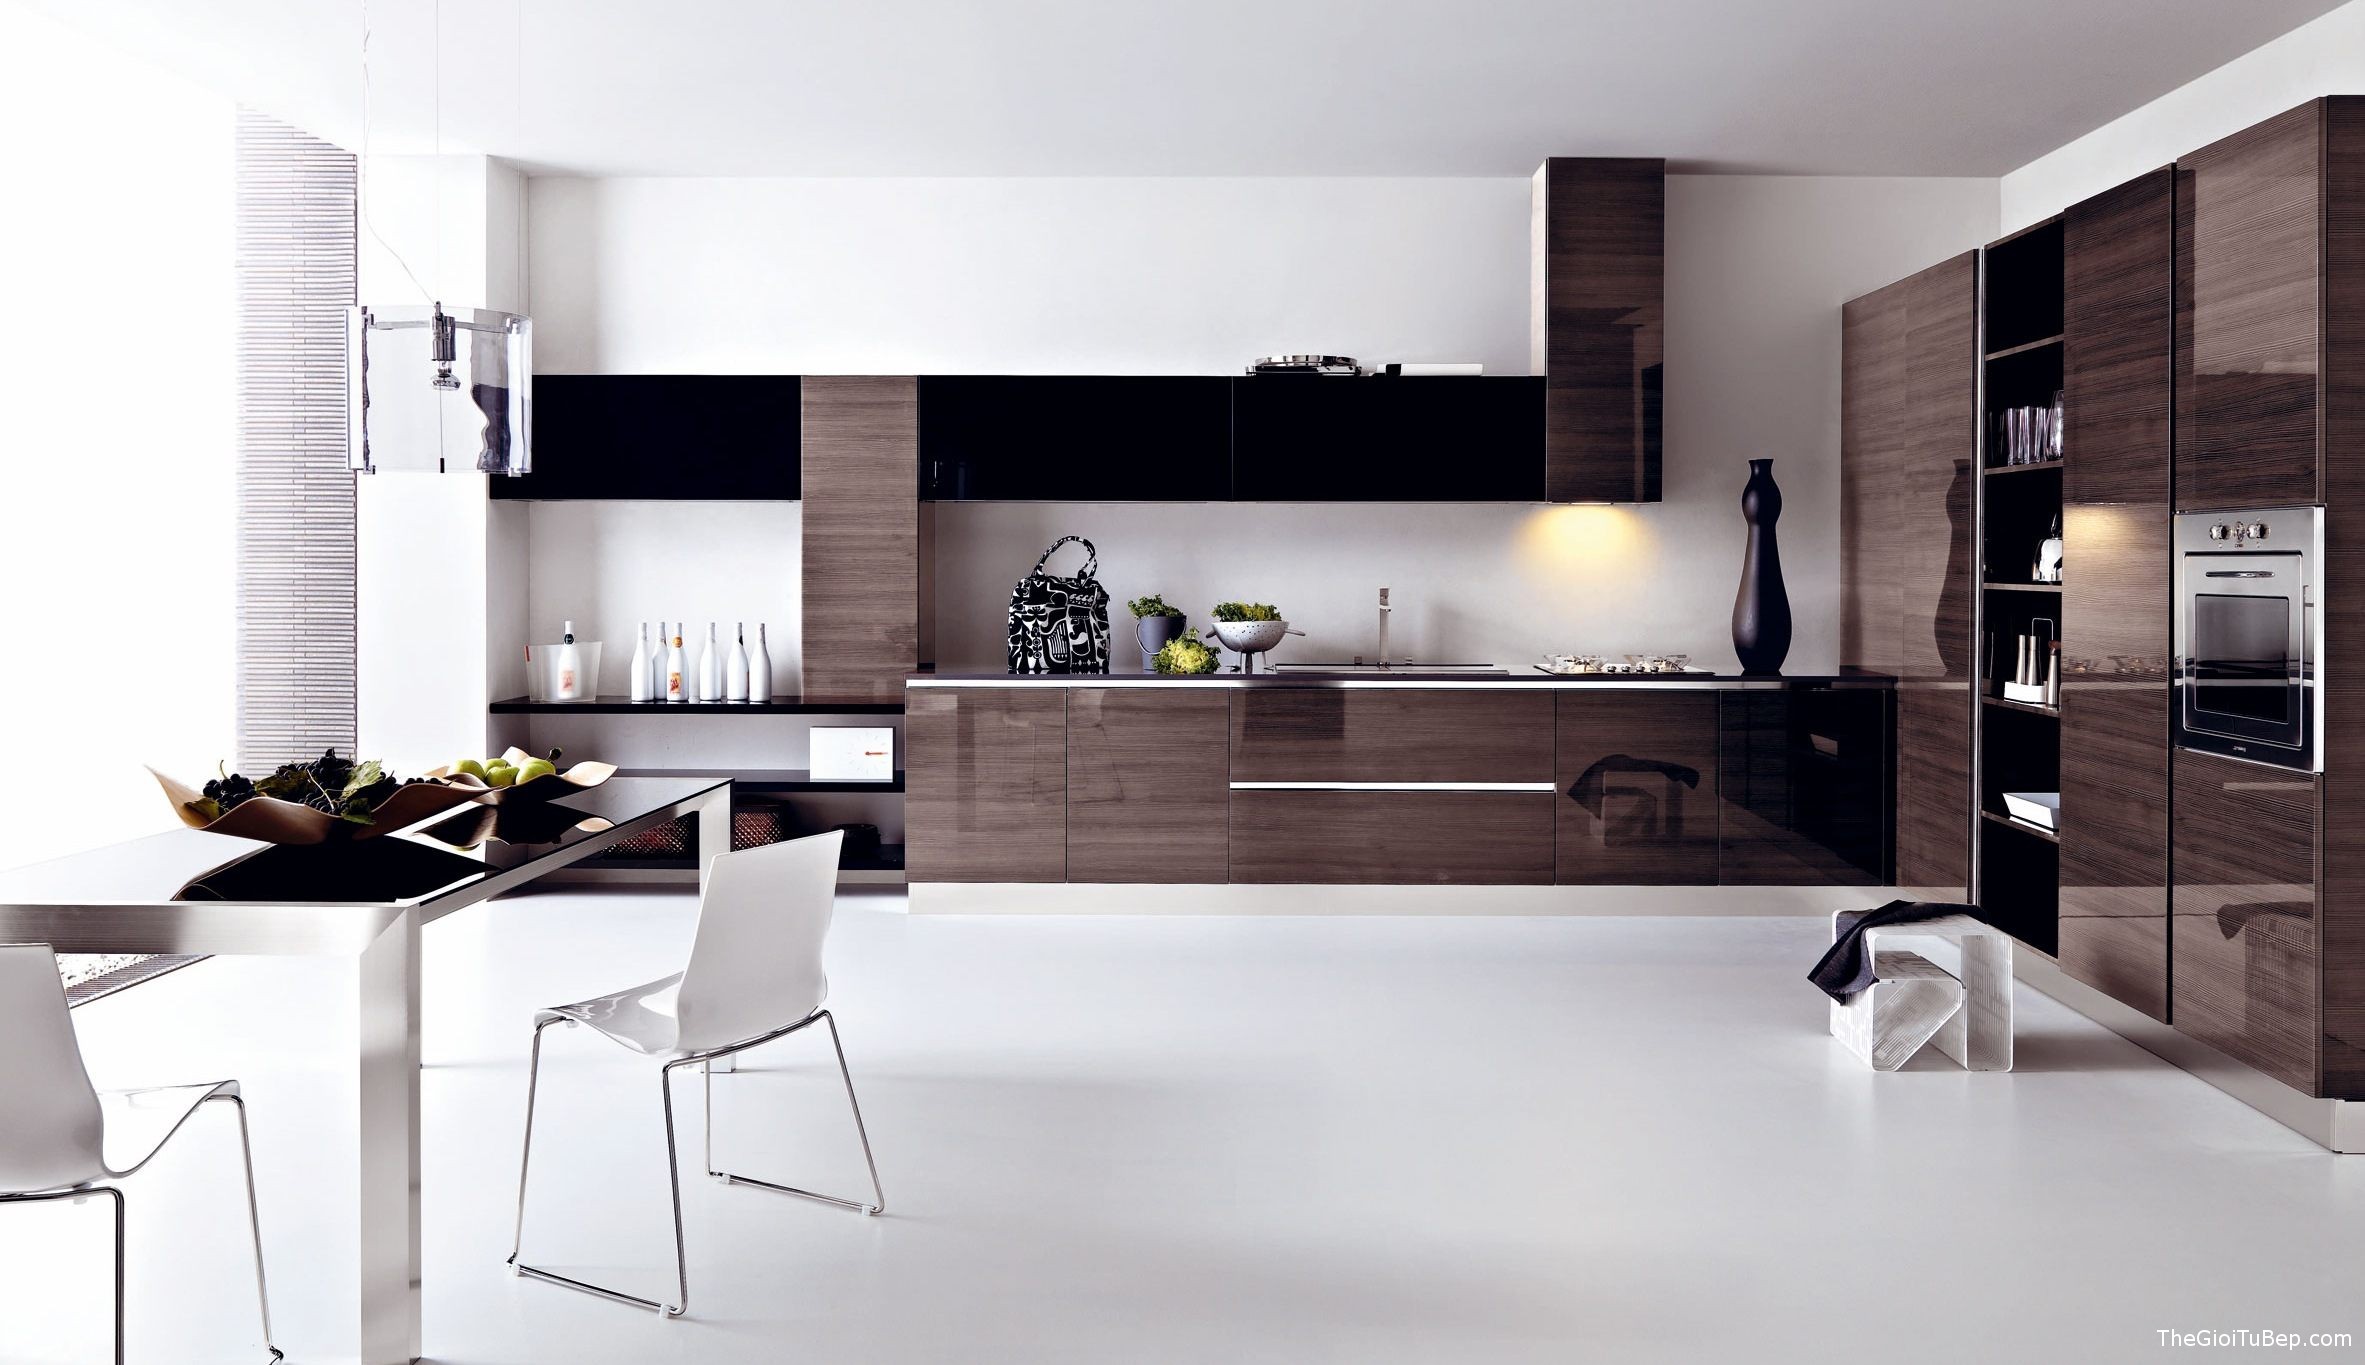 modern-kitchen-ideas-with-gloosy-black-kitchen-cabinet-and-glass-on-top-table-and-white-chair-dining-set-kitchen-photo-modern-kitchen-ideas